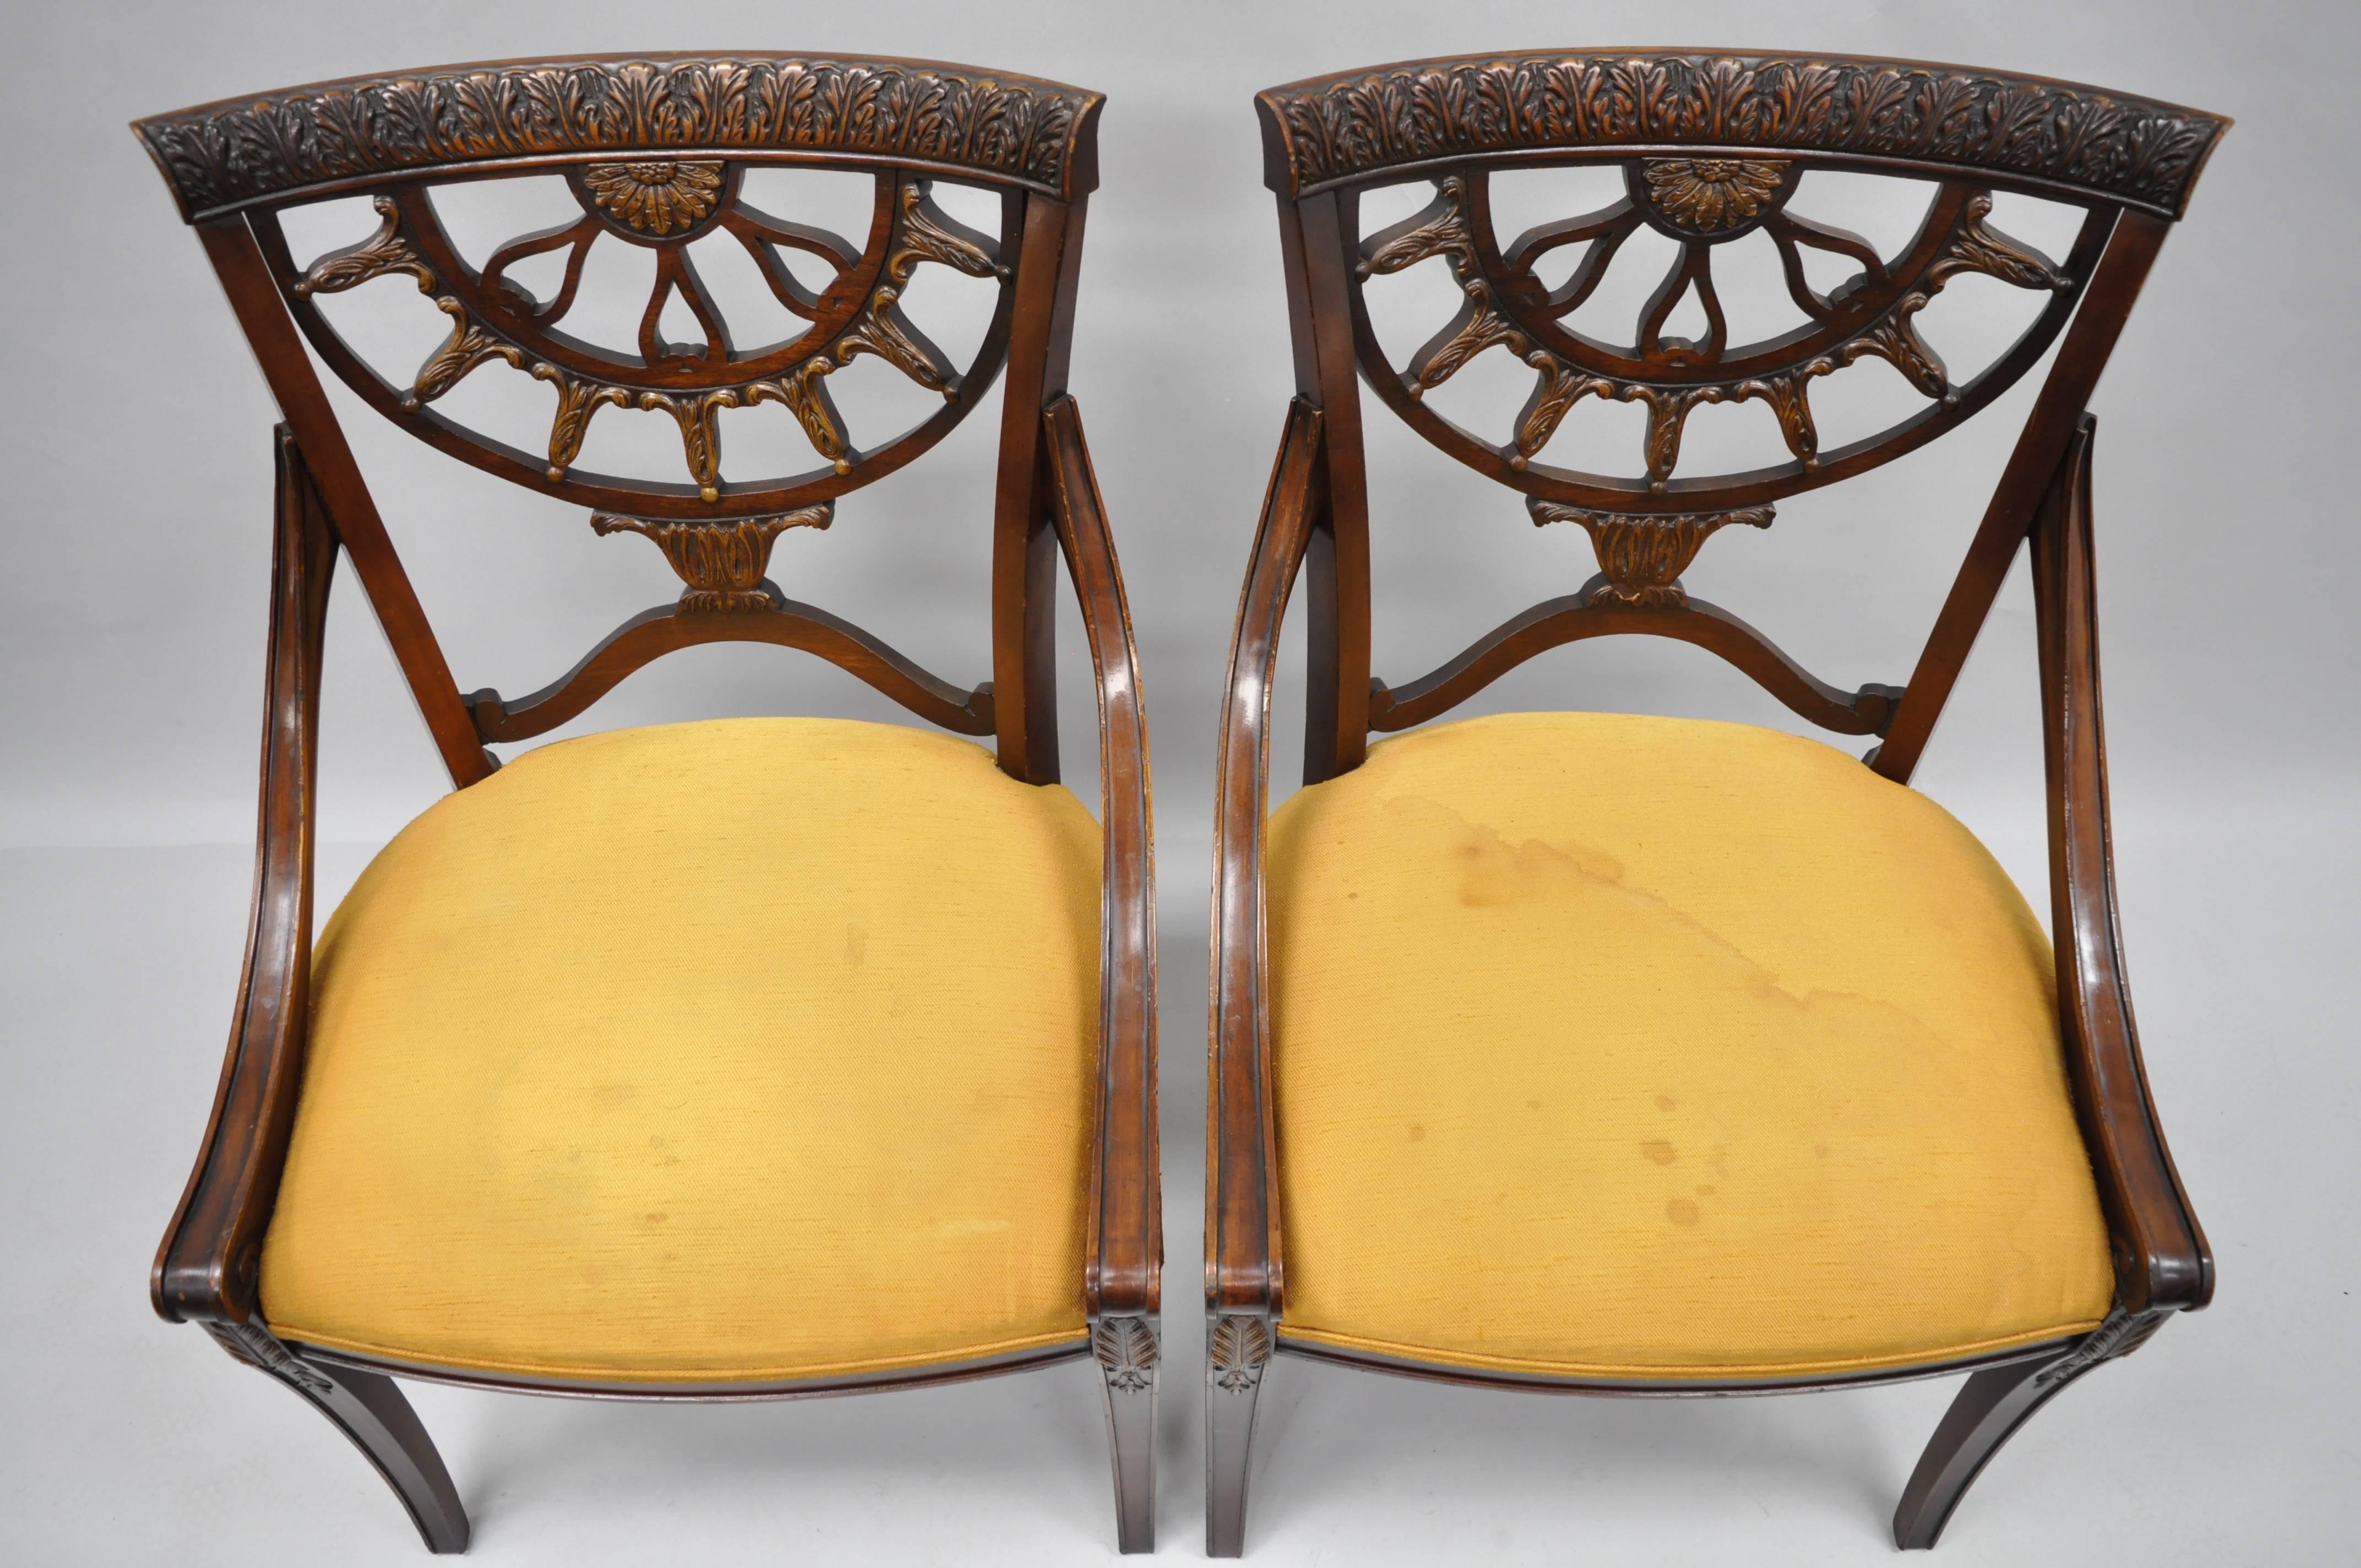 20th Century Pair of Antique French Regency Style Pierce Carved Mahogany Dining Room Chairs